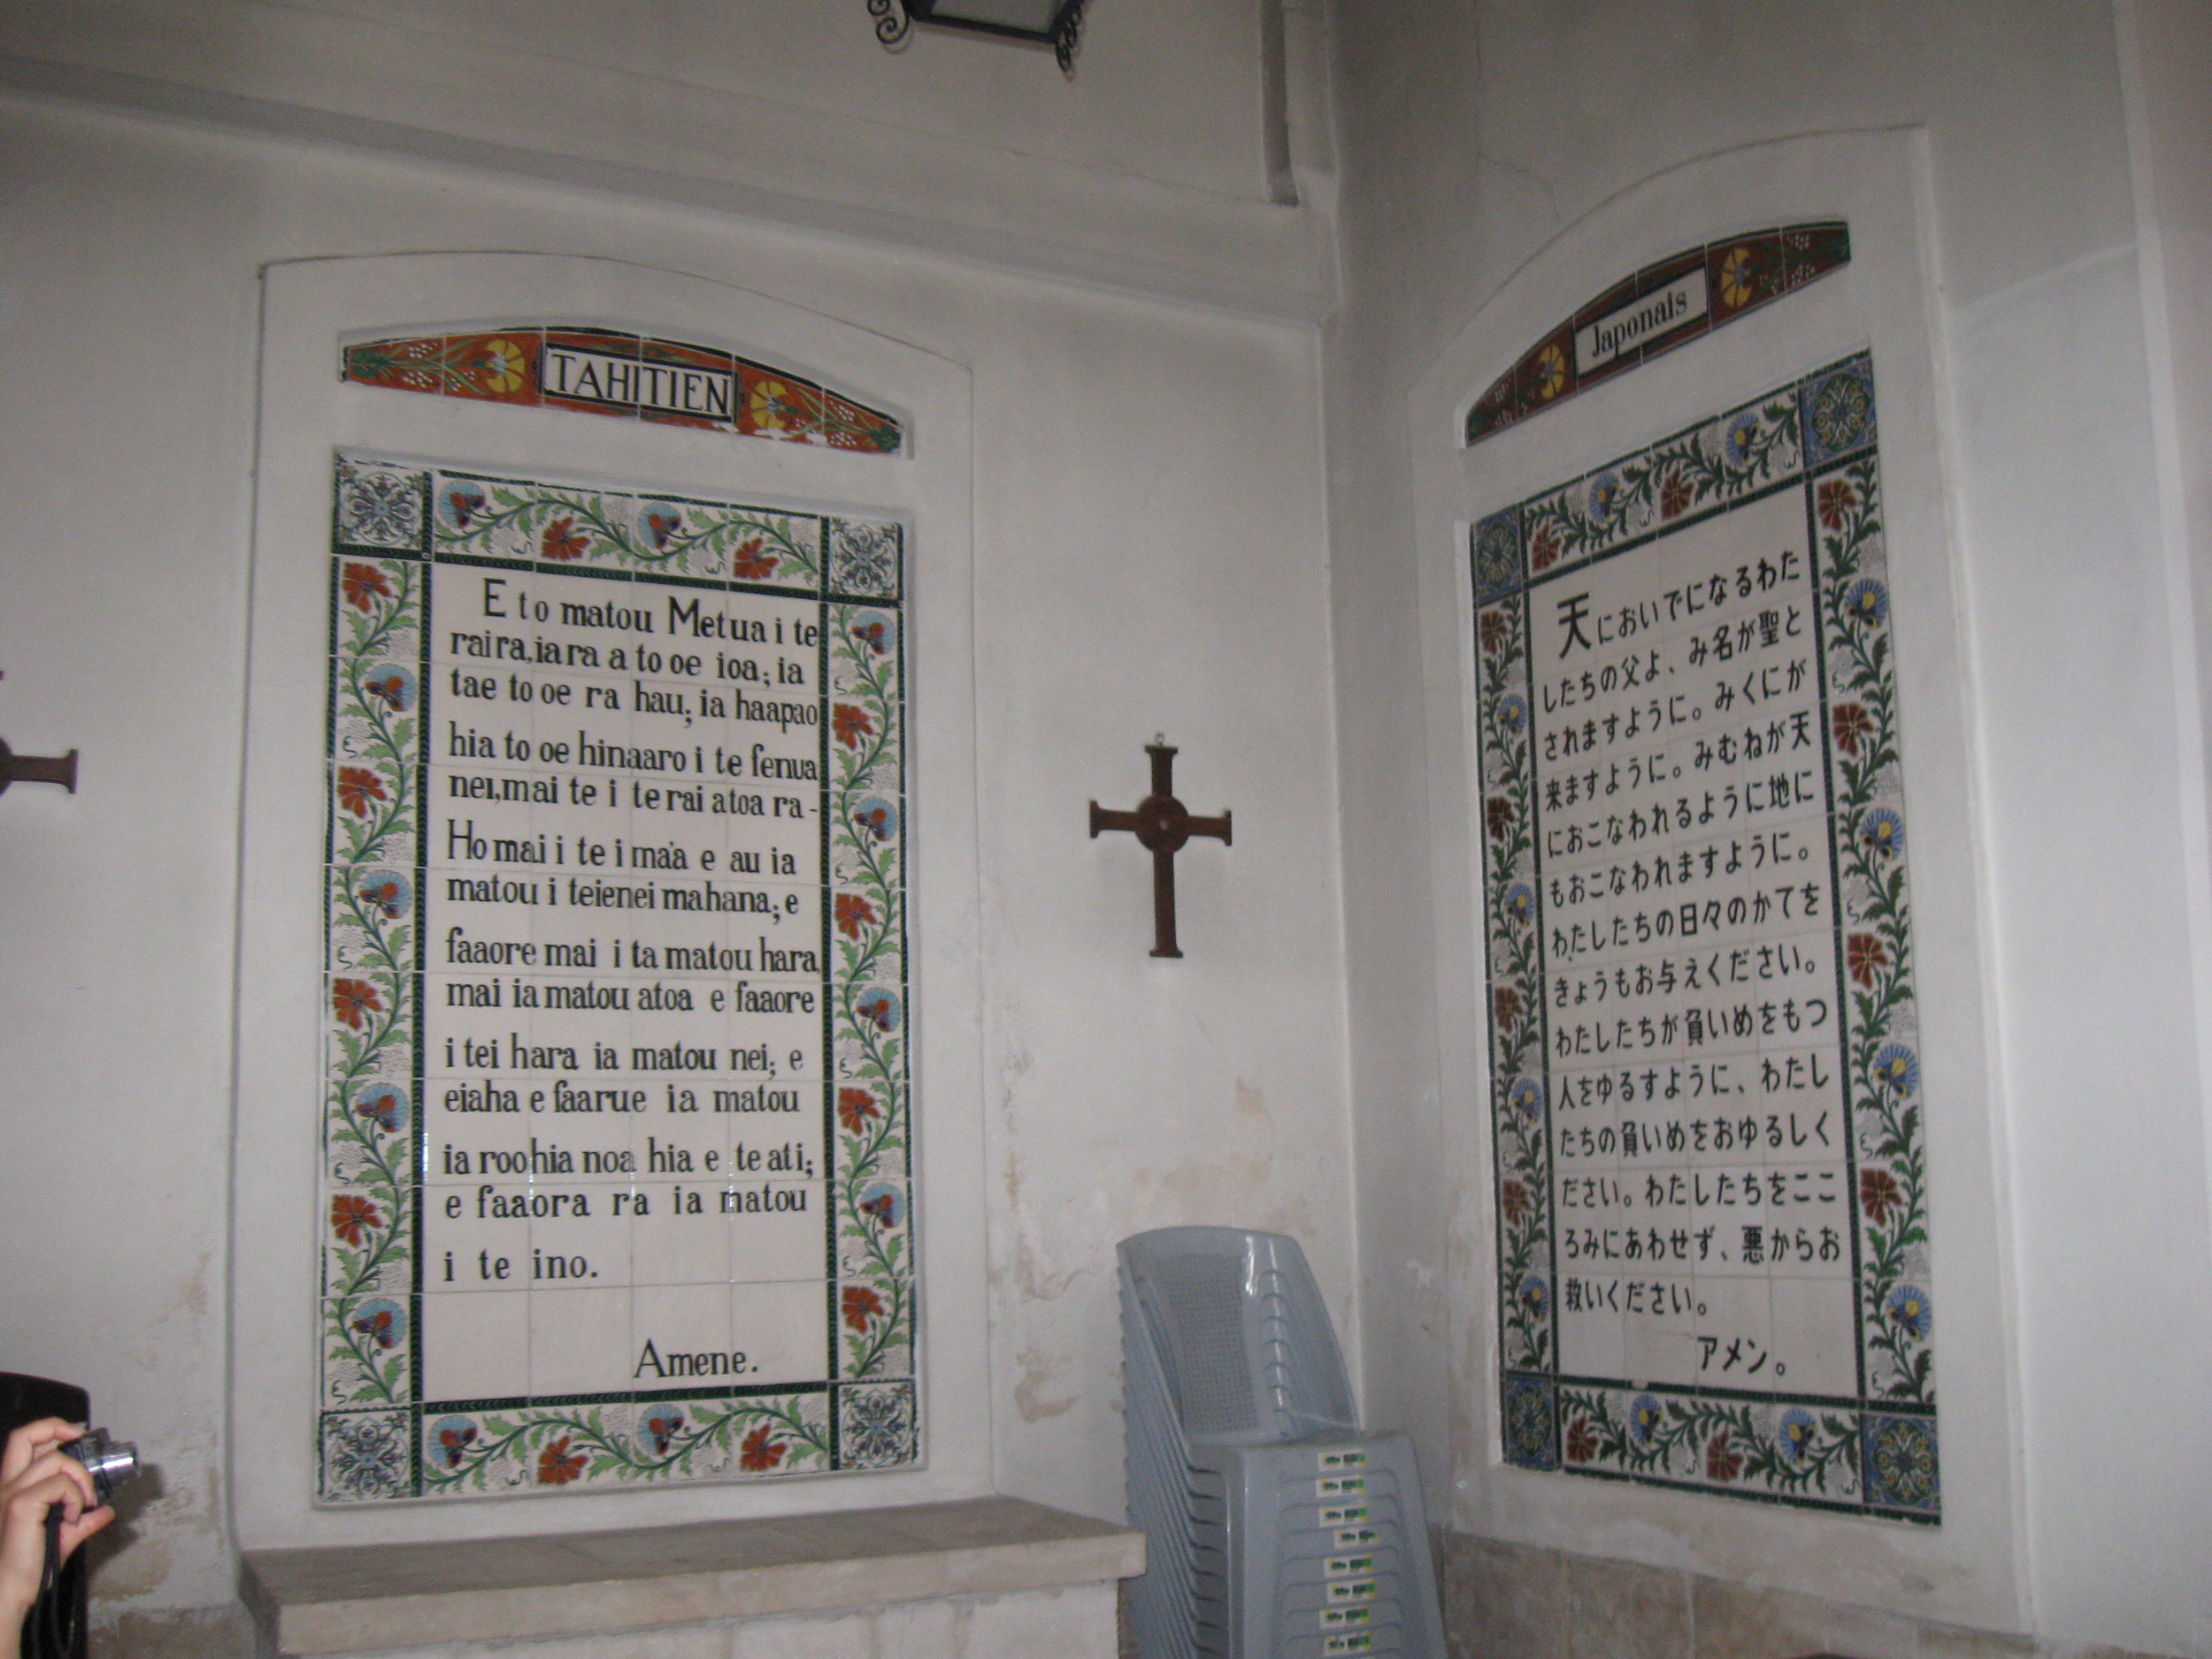 Photo of two plaques on a wall. On the left is a text of the Lord's Prayer in Tahitian; on the right is the text in Japanese. A cross hangs on the wall between them.